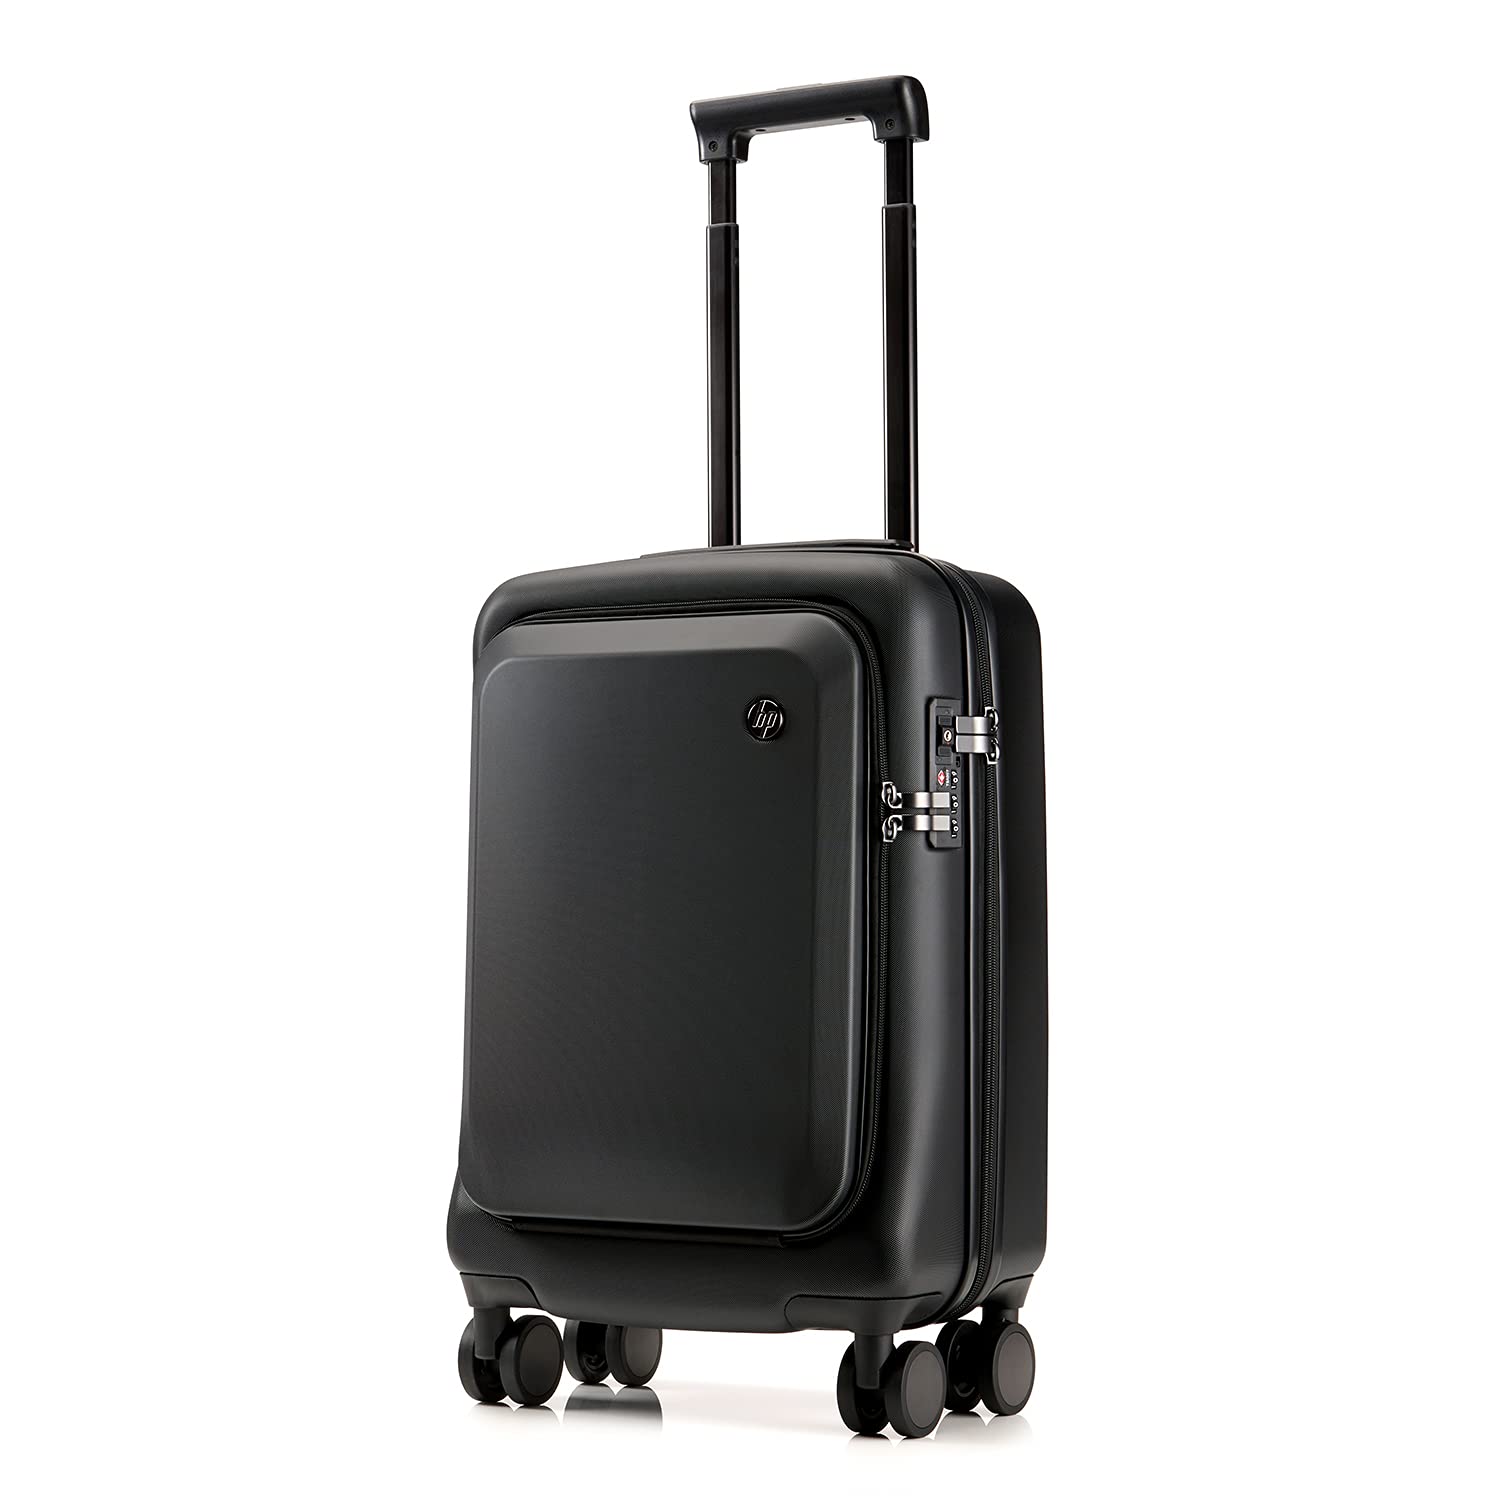 HP ALL IN ONE CARRY ON LUGGAGE